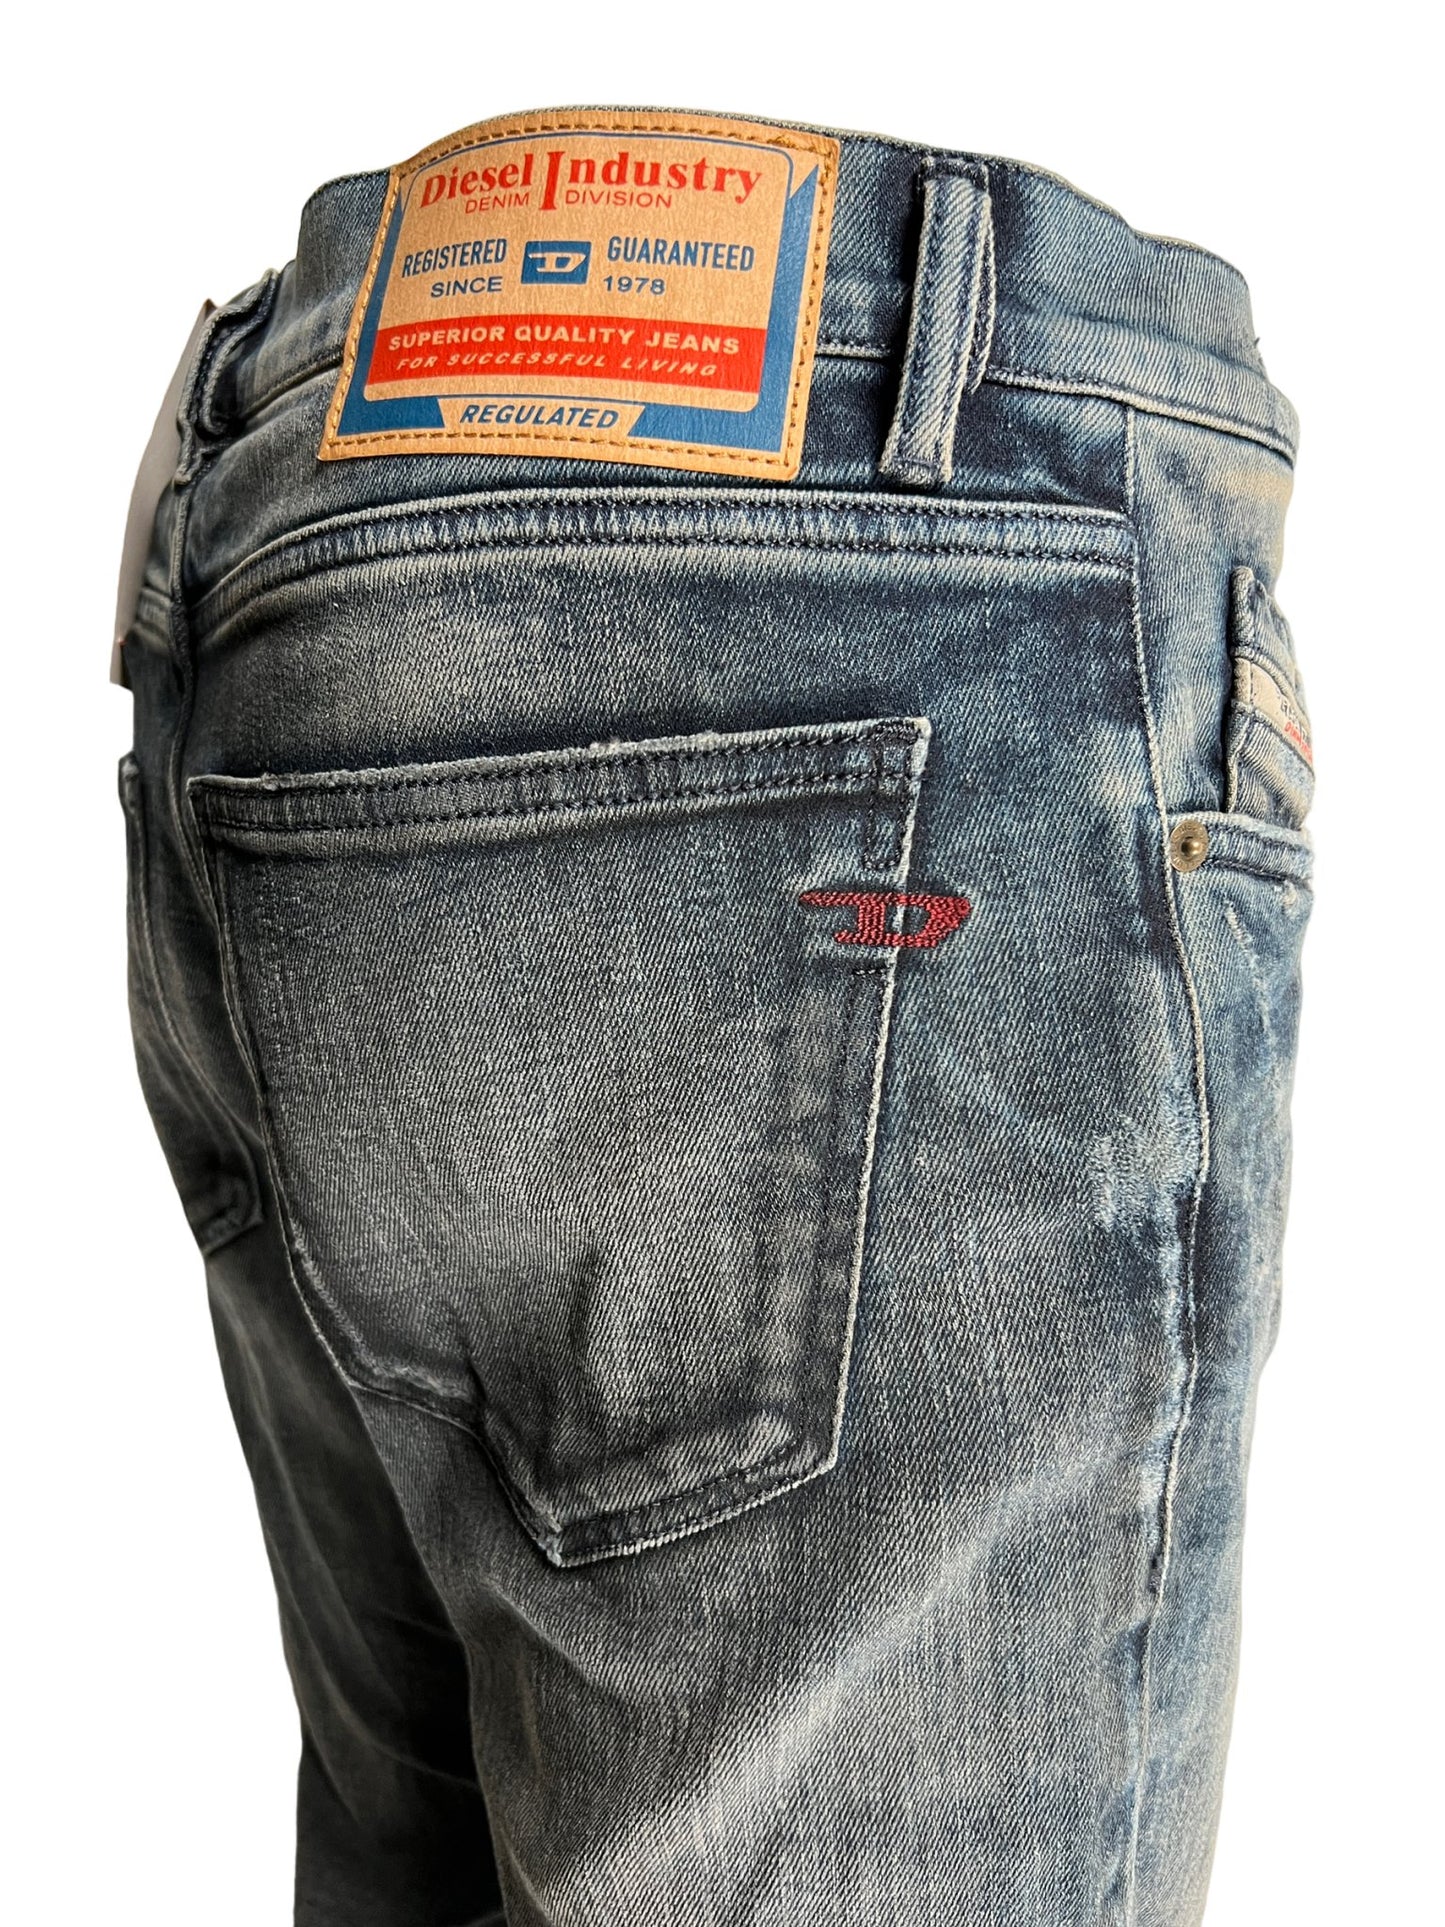 A pair of comfortable Diesel jeans with a label on the back.